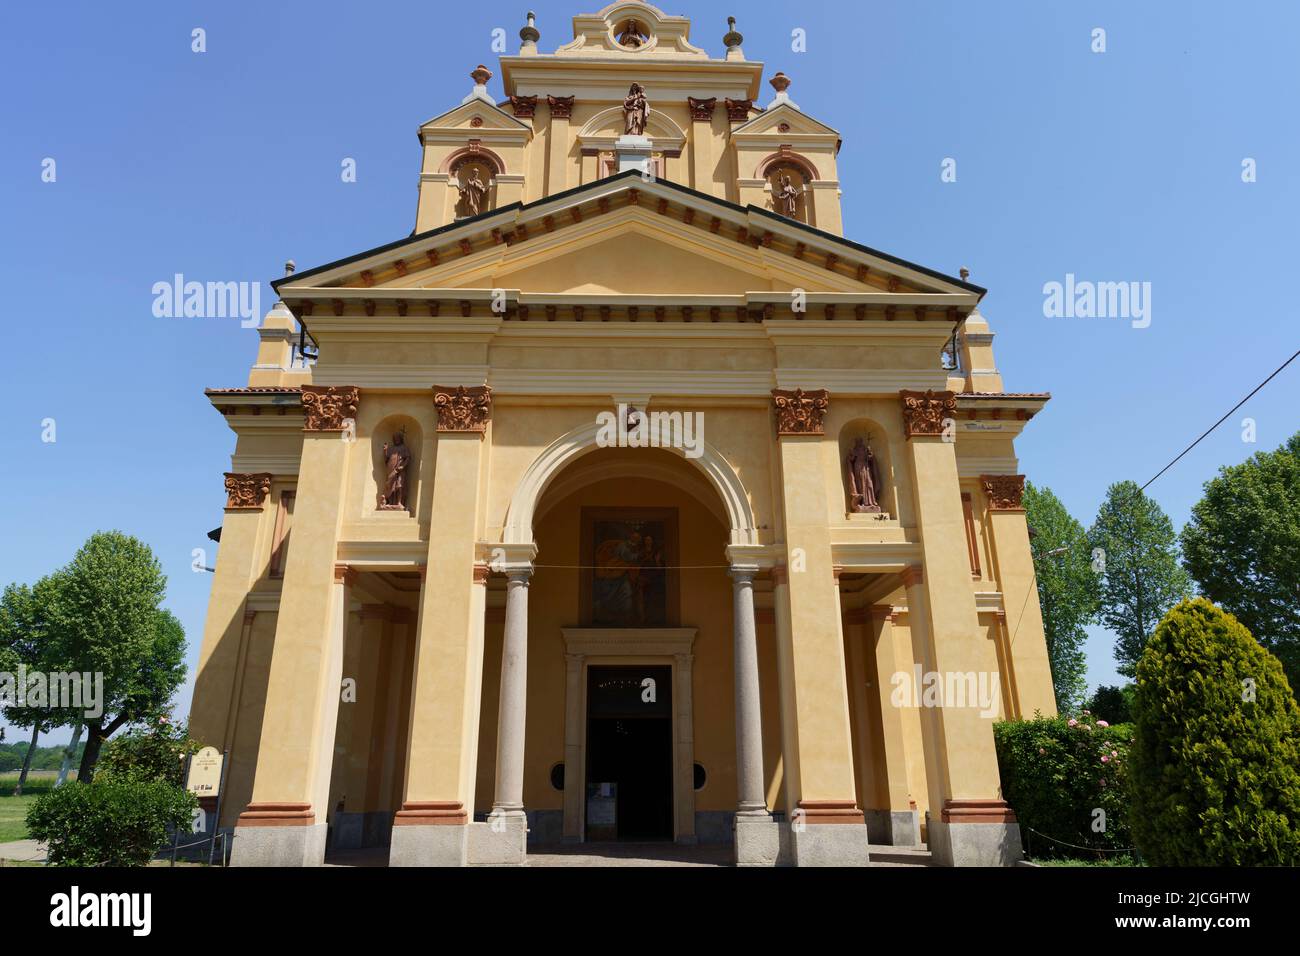 Facade of the Sanctuary of Varallino, at Galliate, in Novara province, Piedmont, Italy, with paintings and sculptures Stock Photo